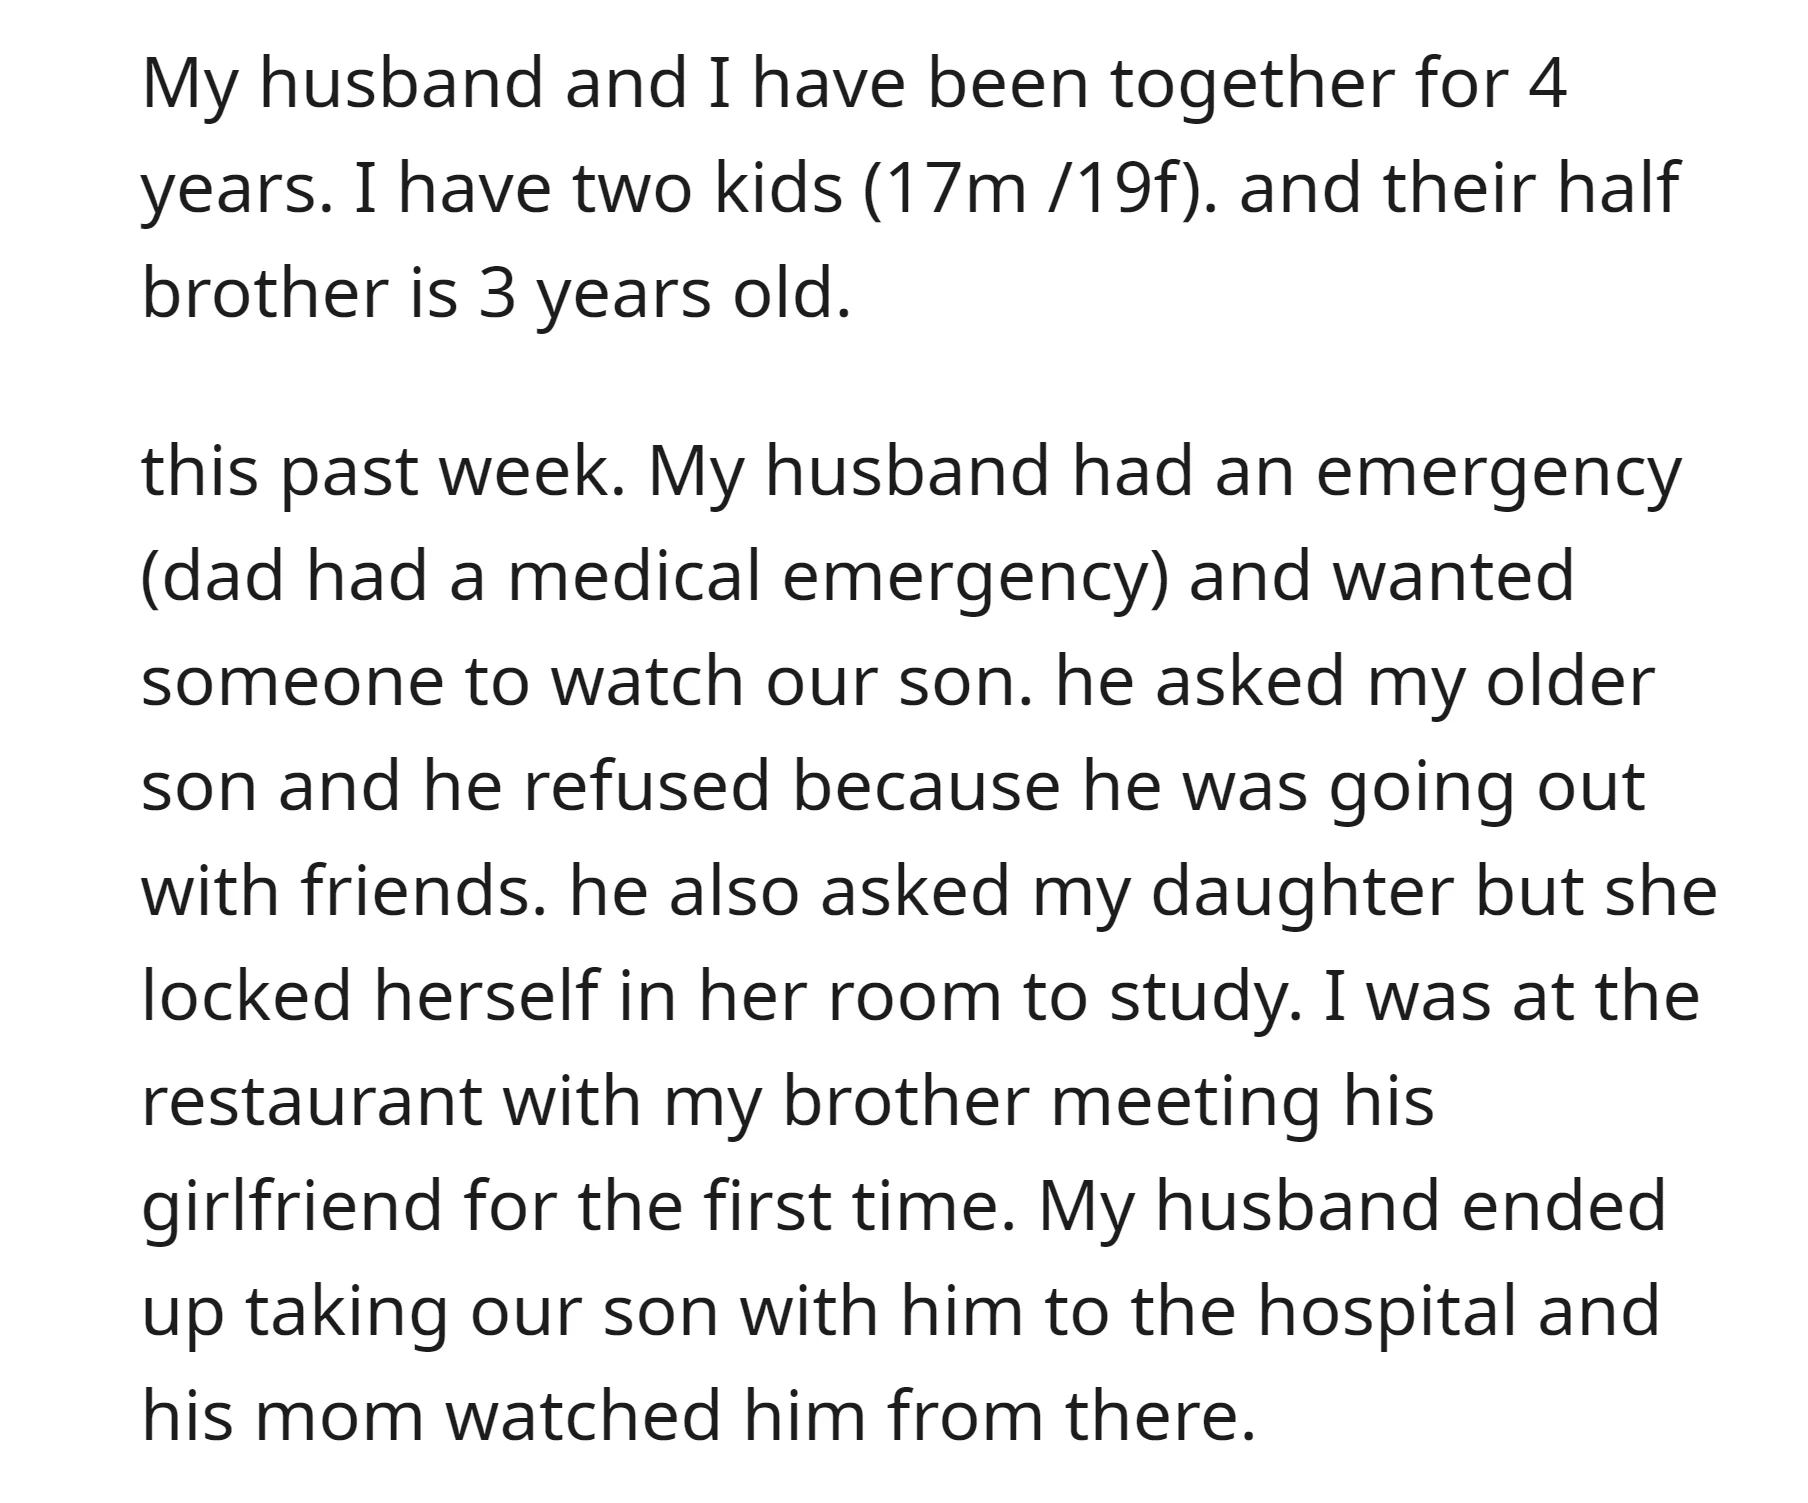 OP's husband he had to take the child to the hospital